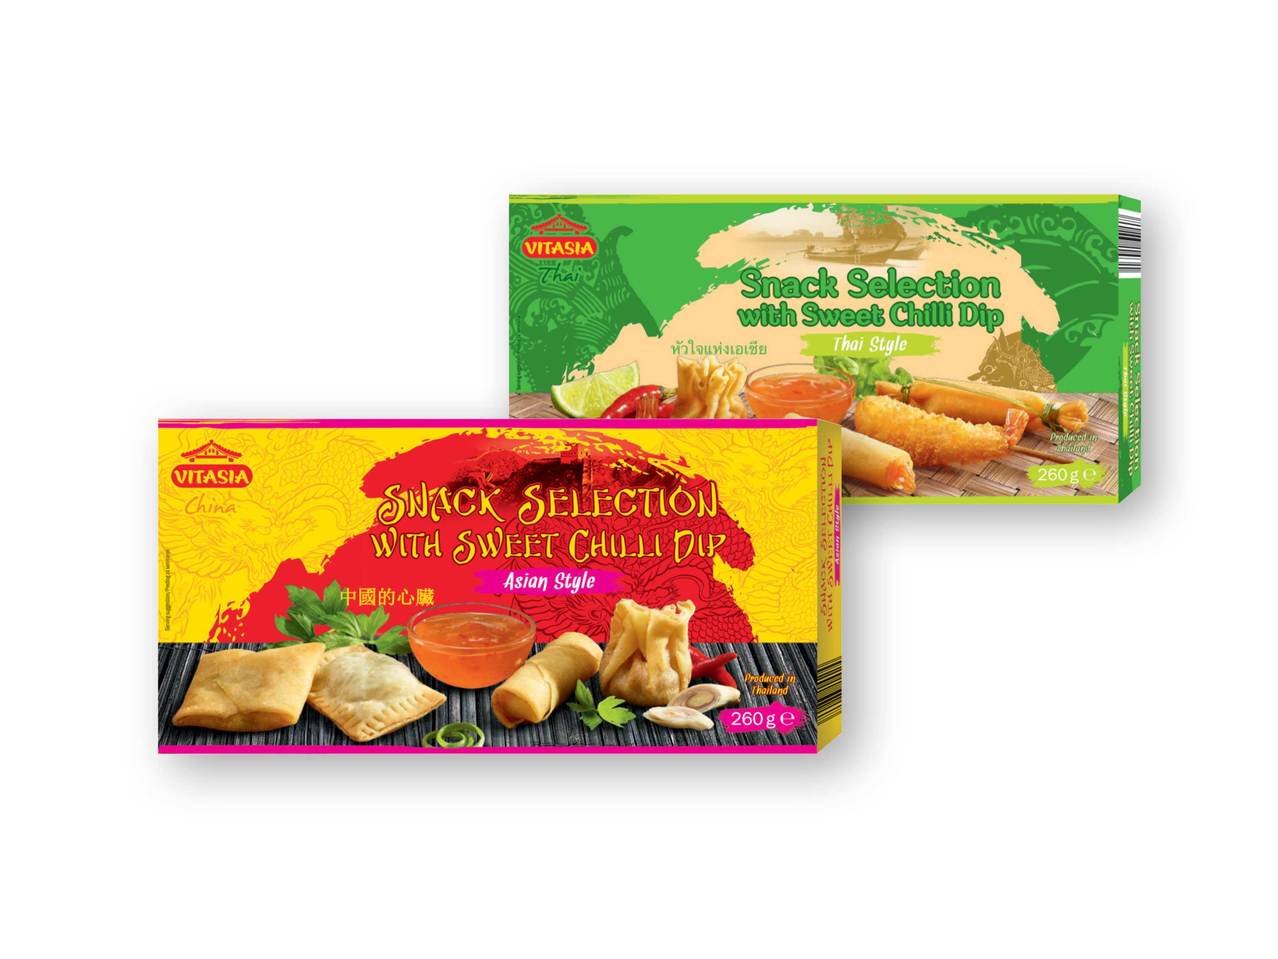 VITASIA Asian Snack Selection with Sweet Chilli Dip